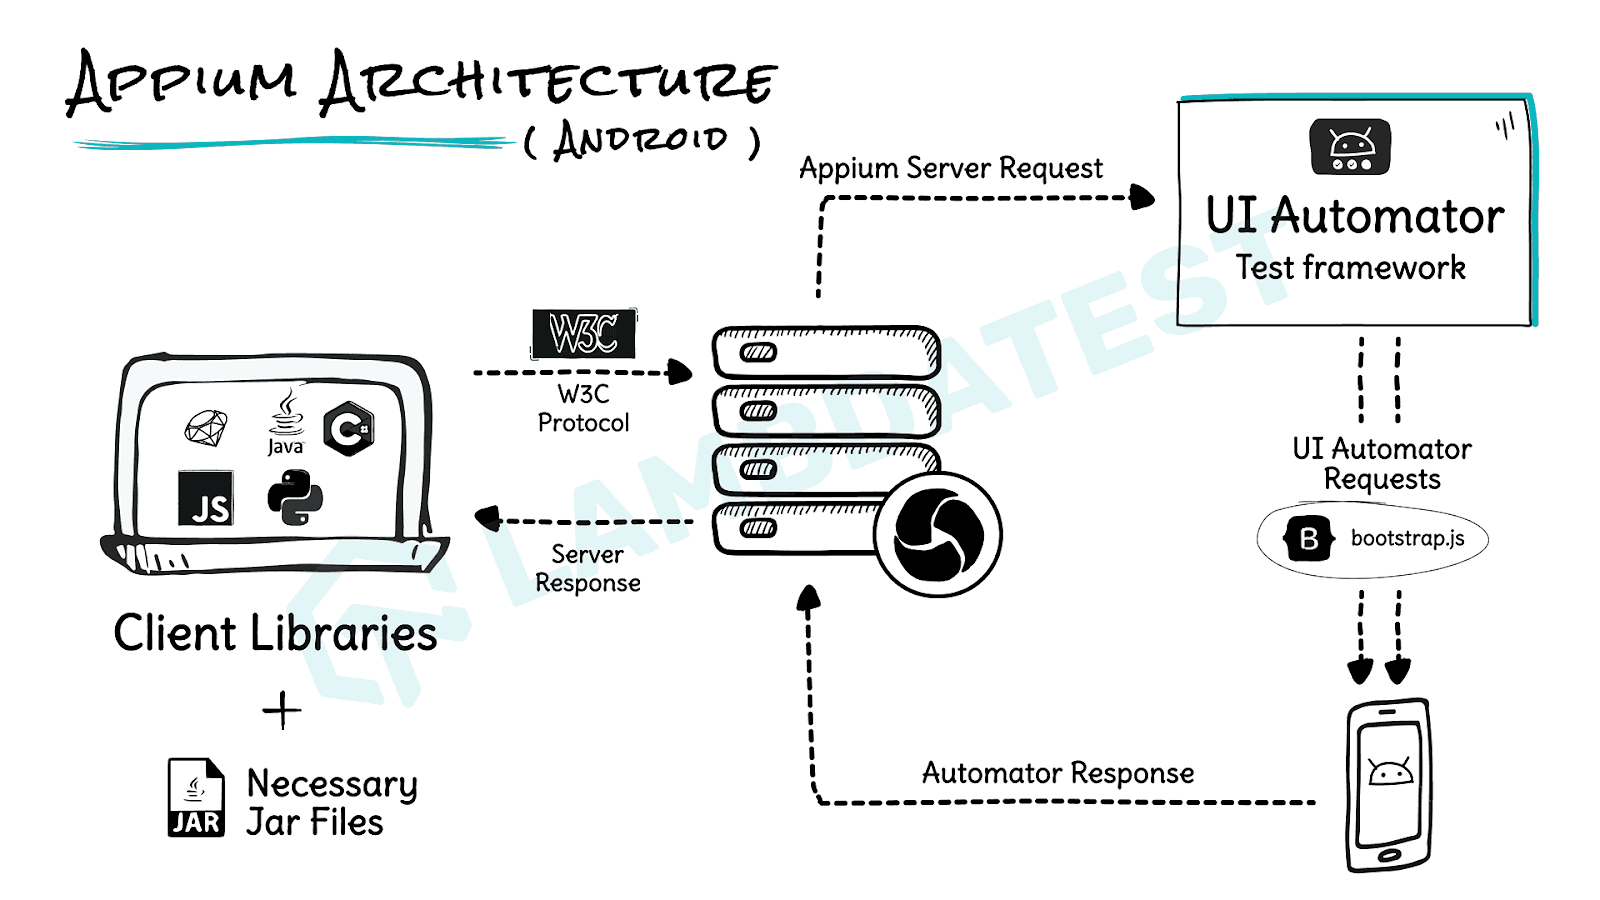 Appium architecture for Android